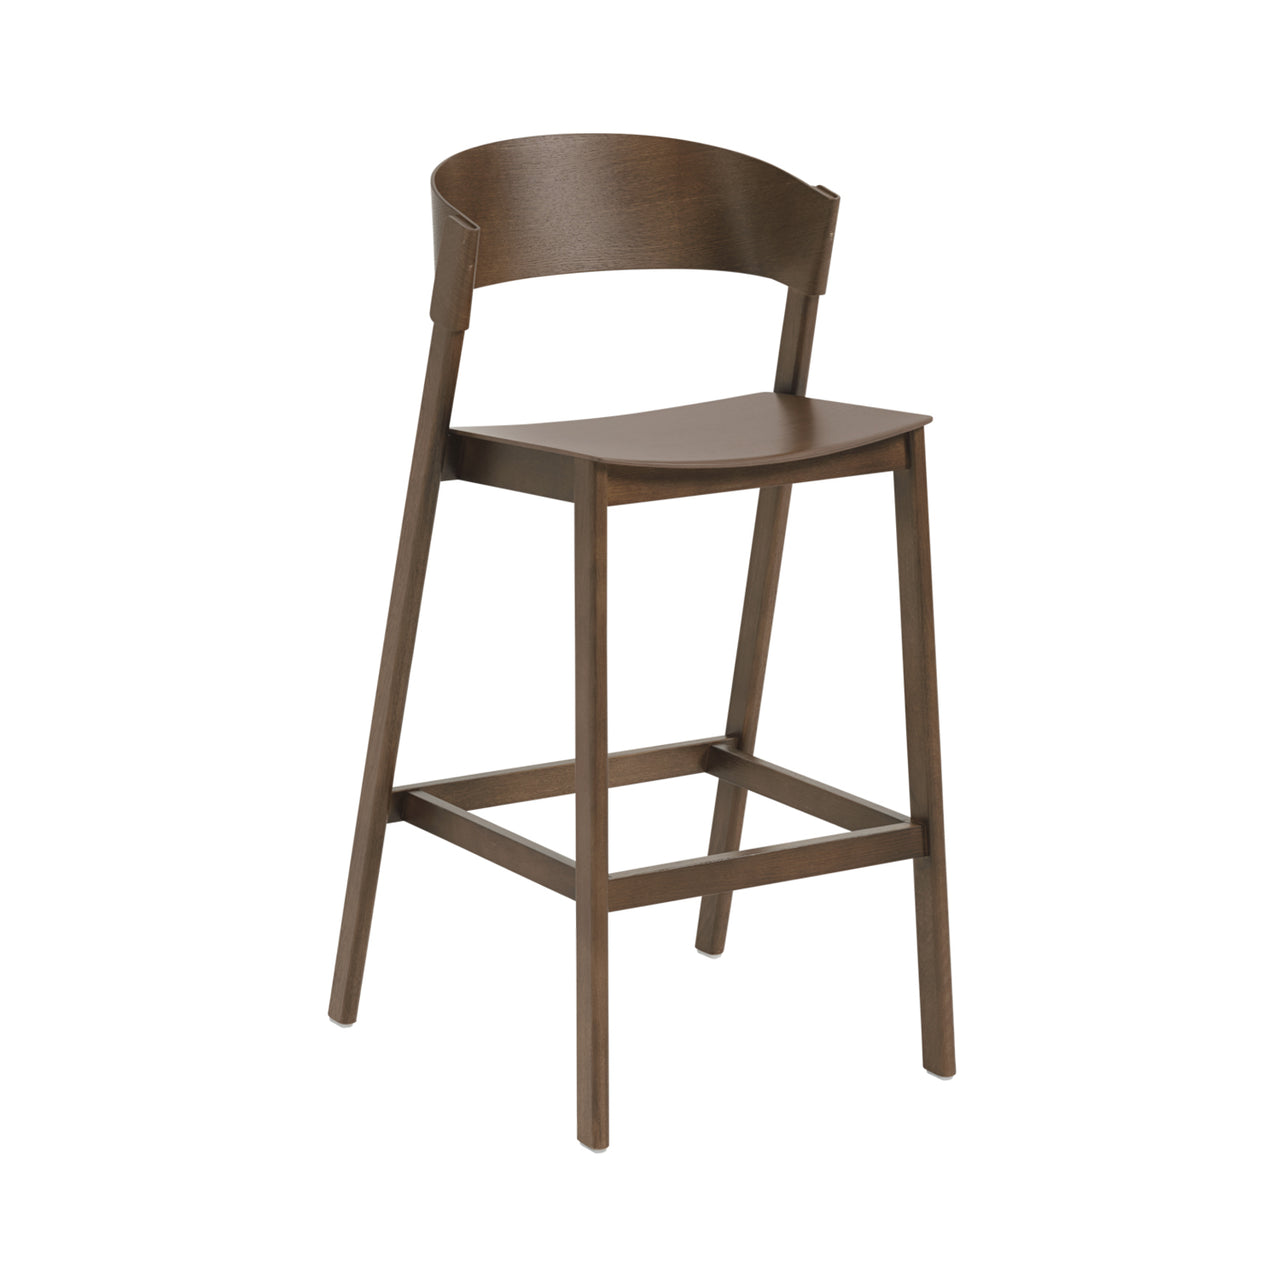 Cover Bar + Counter Stool: Bar + Stained Dark Brown